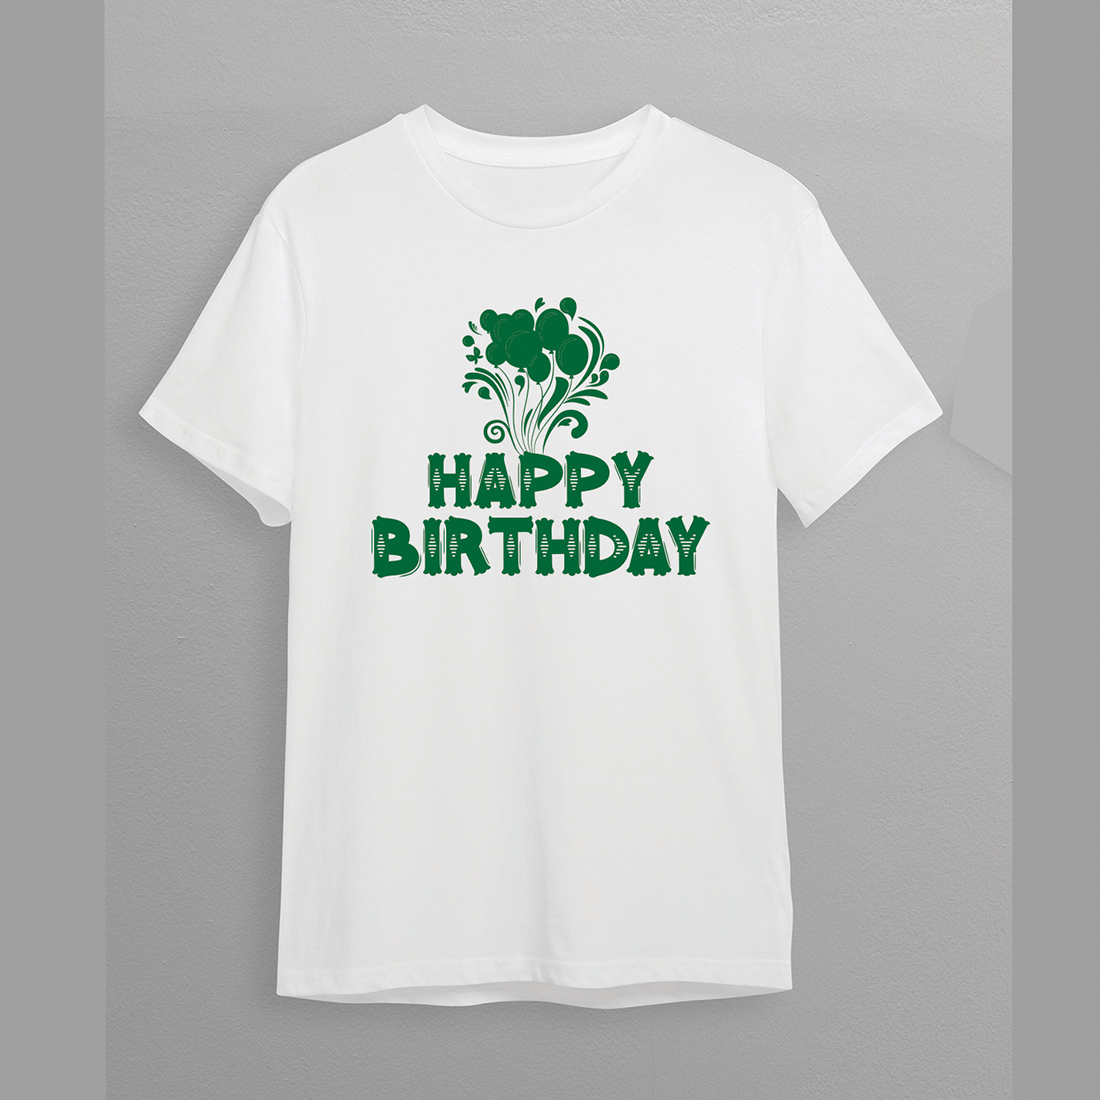 happy birthday and t shirt logo design preview image.